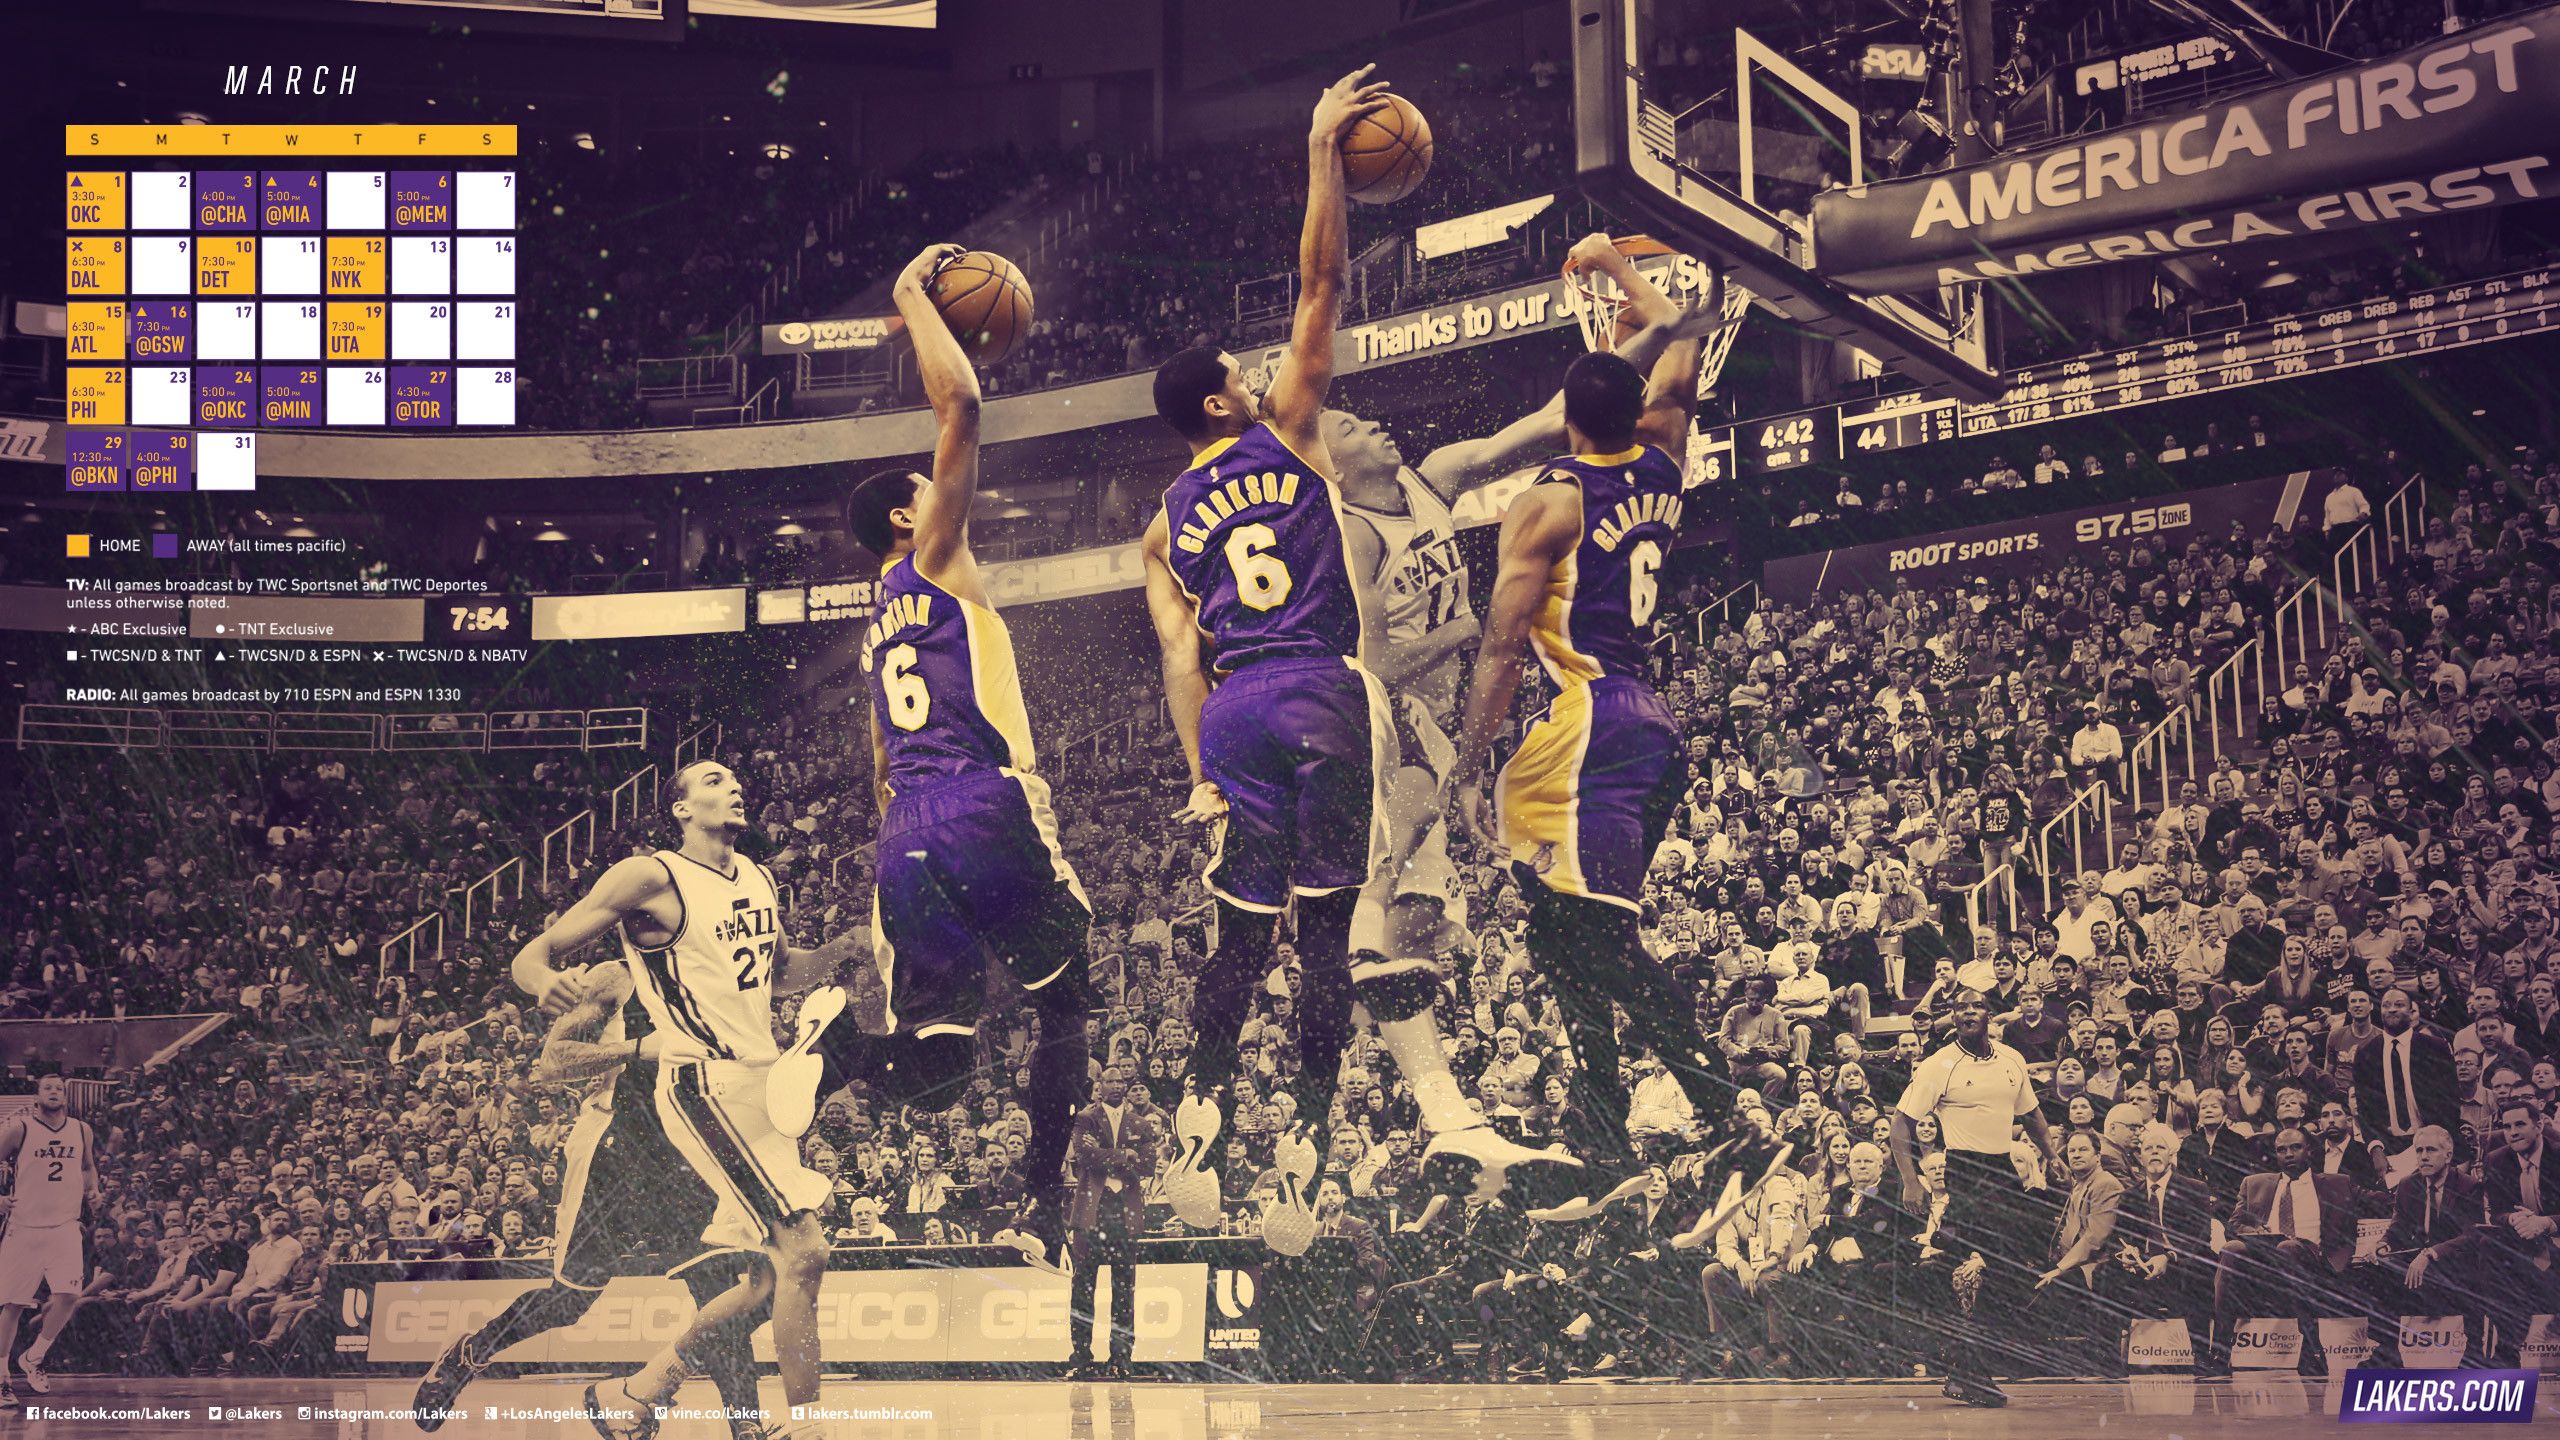 The lakers wallpaper is back, and this time it's for March. - NBA